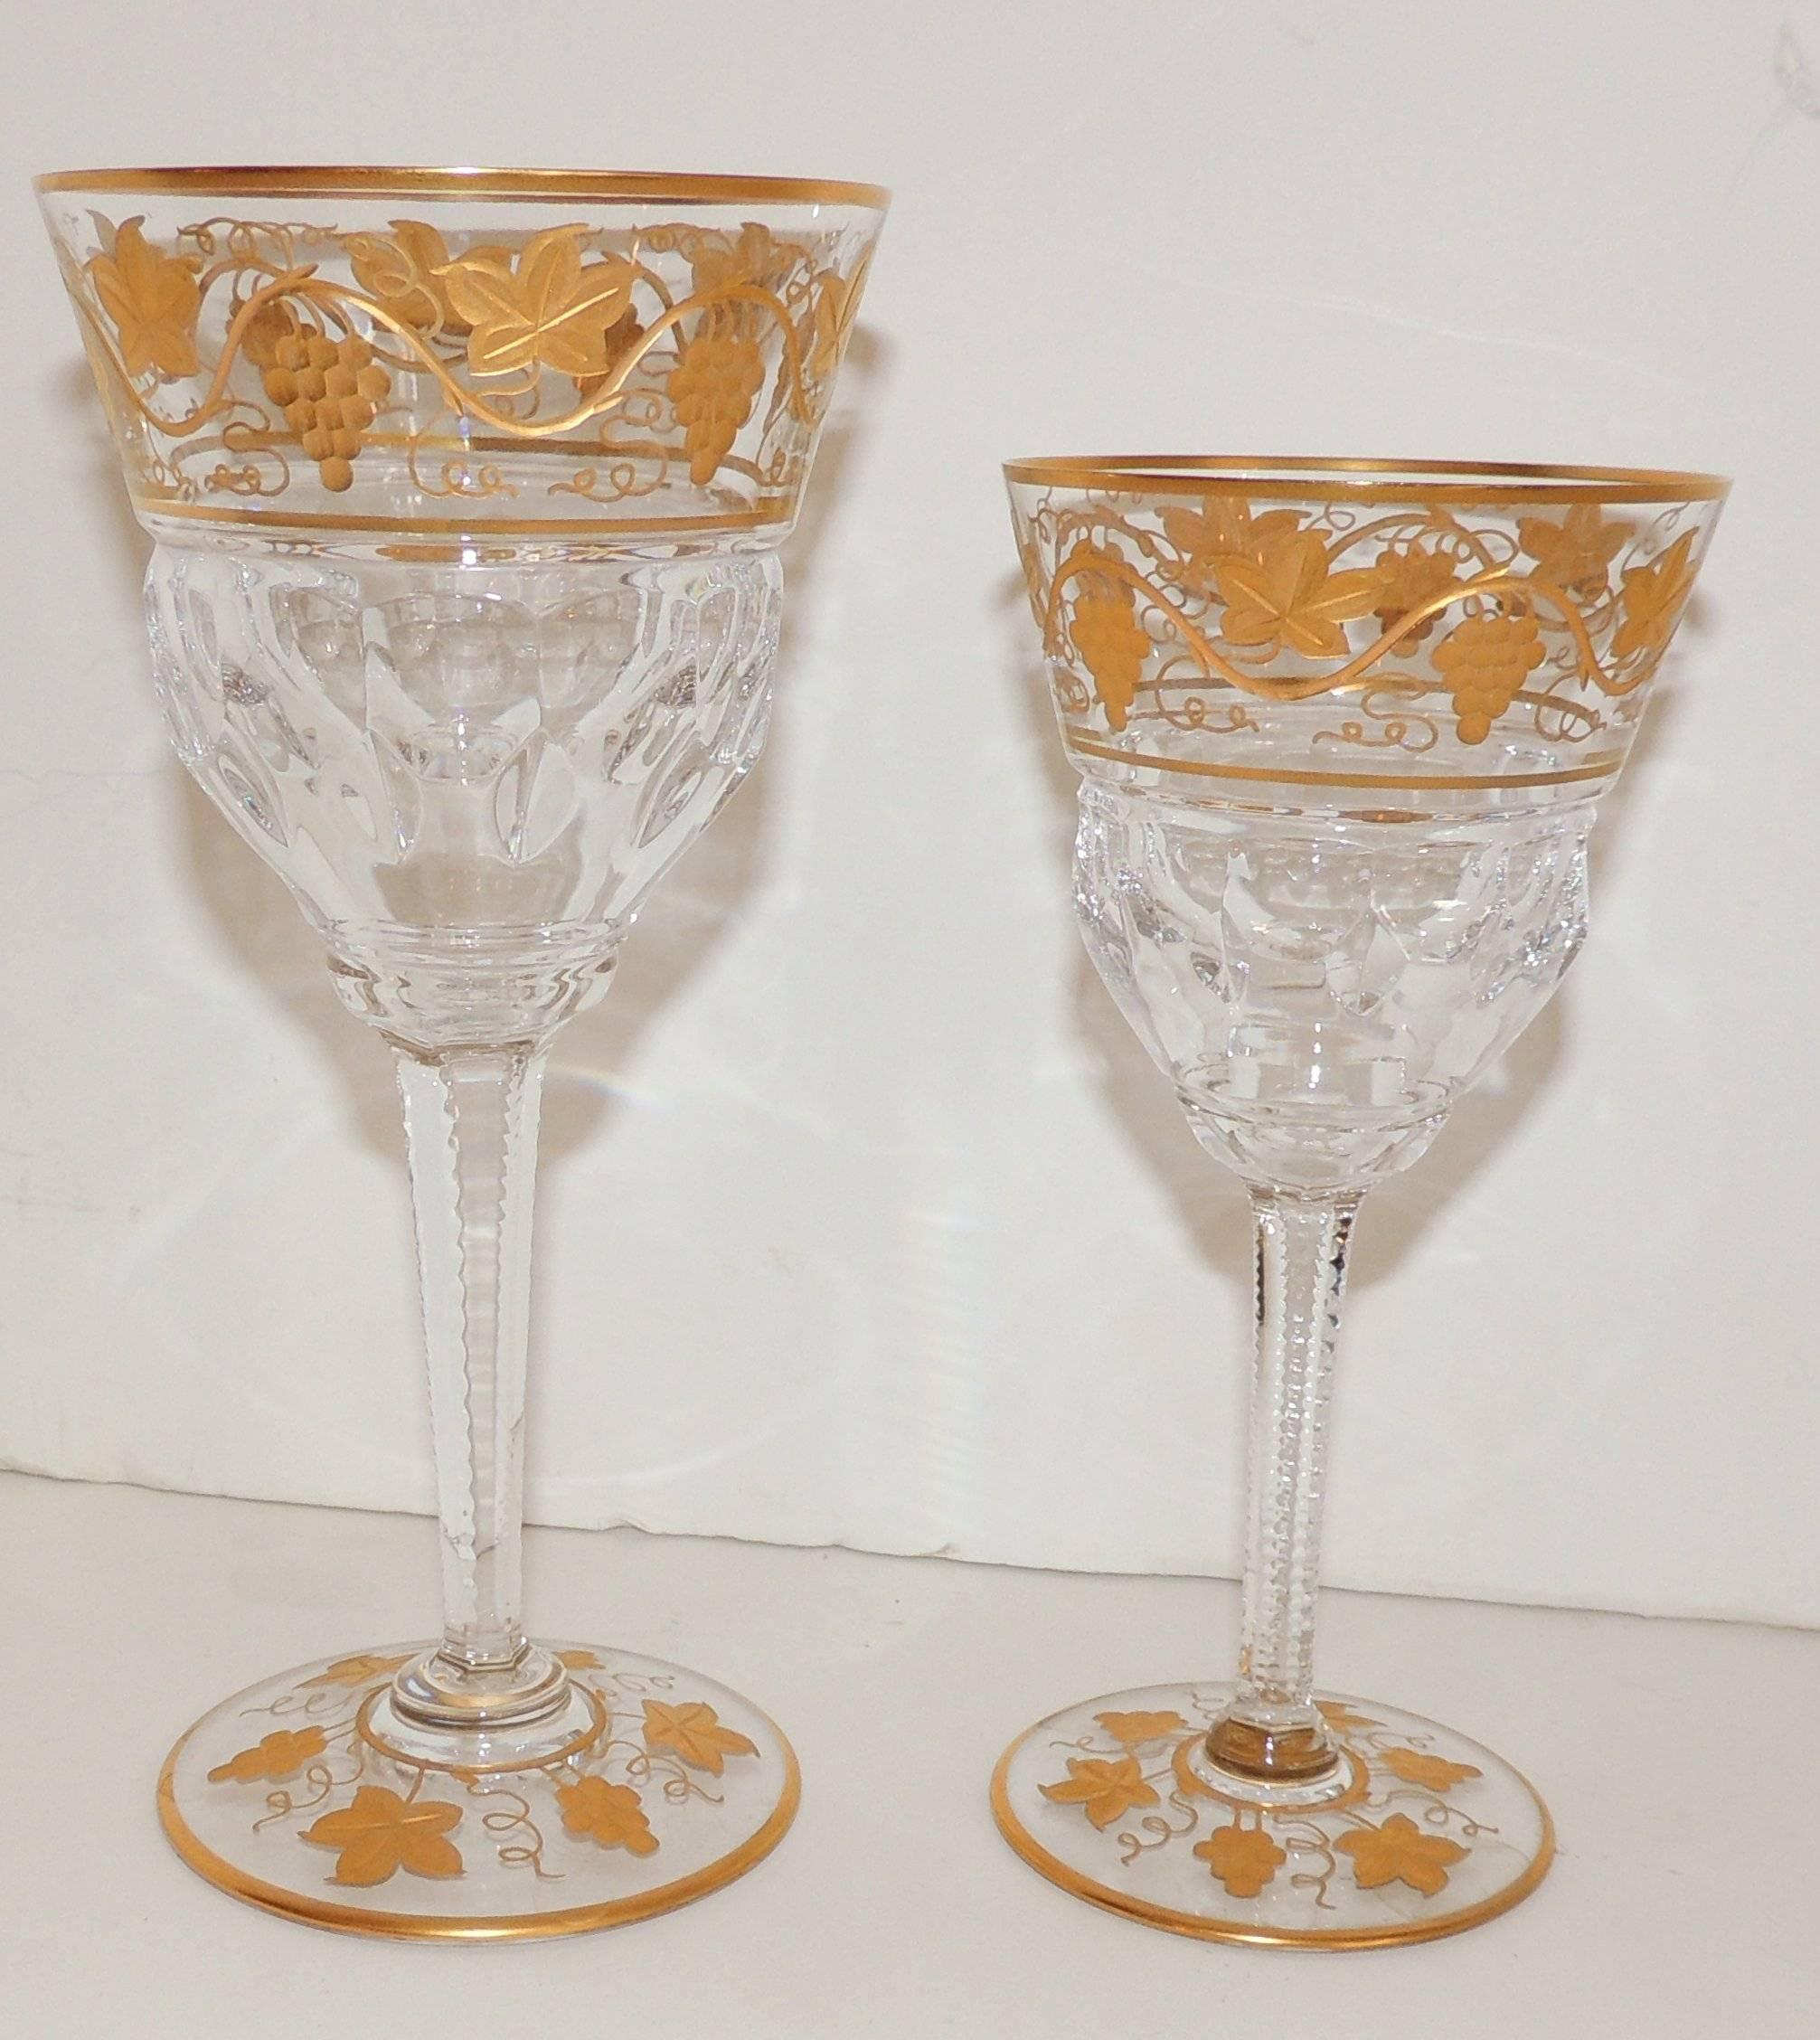 Wonderful set of goblets, stemware by Val St. Lambert Pampre D'Or pattern, circa 1930s. Gilt vine design water and wine glasses from Belgium.

Measures: 11 Wine 6.38